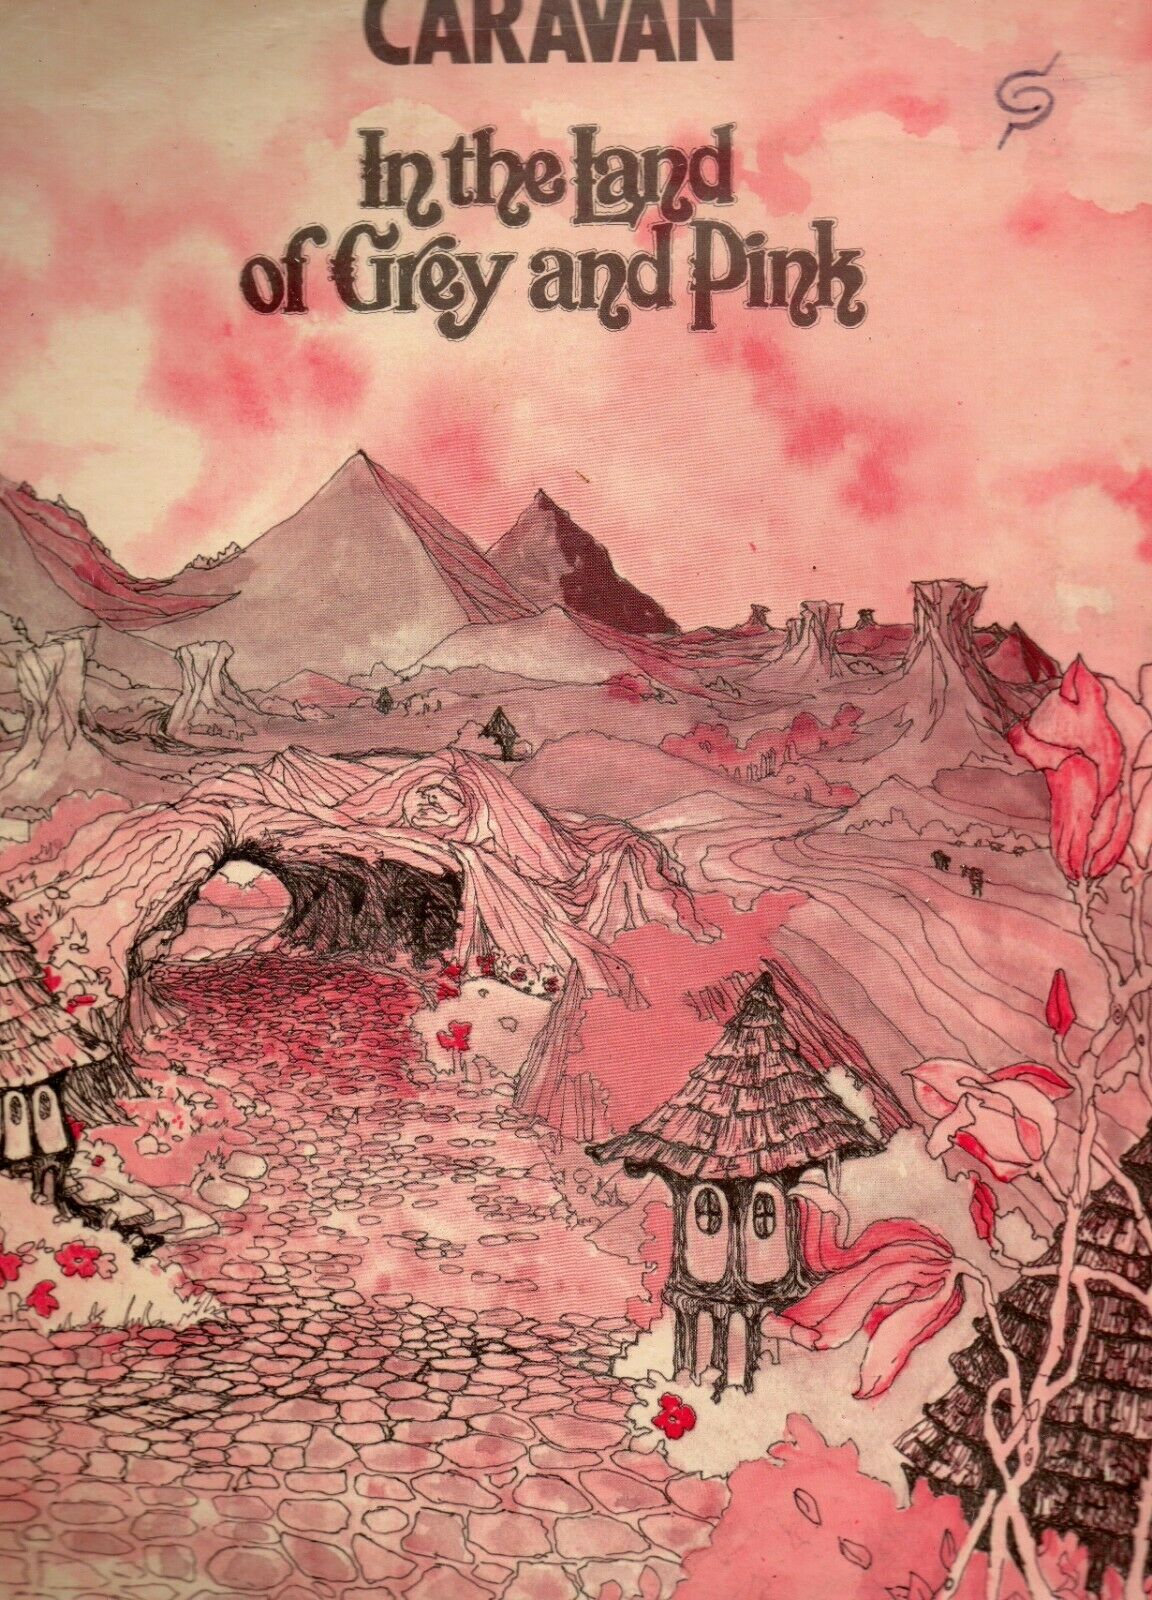 popsike.com - CARAVAN - IN THE LAND OF GREY AND PINK - LP 33 T 